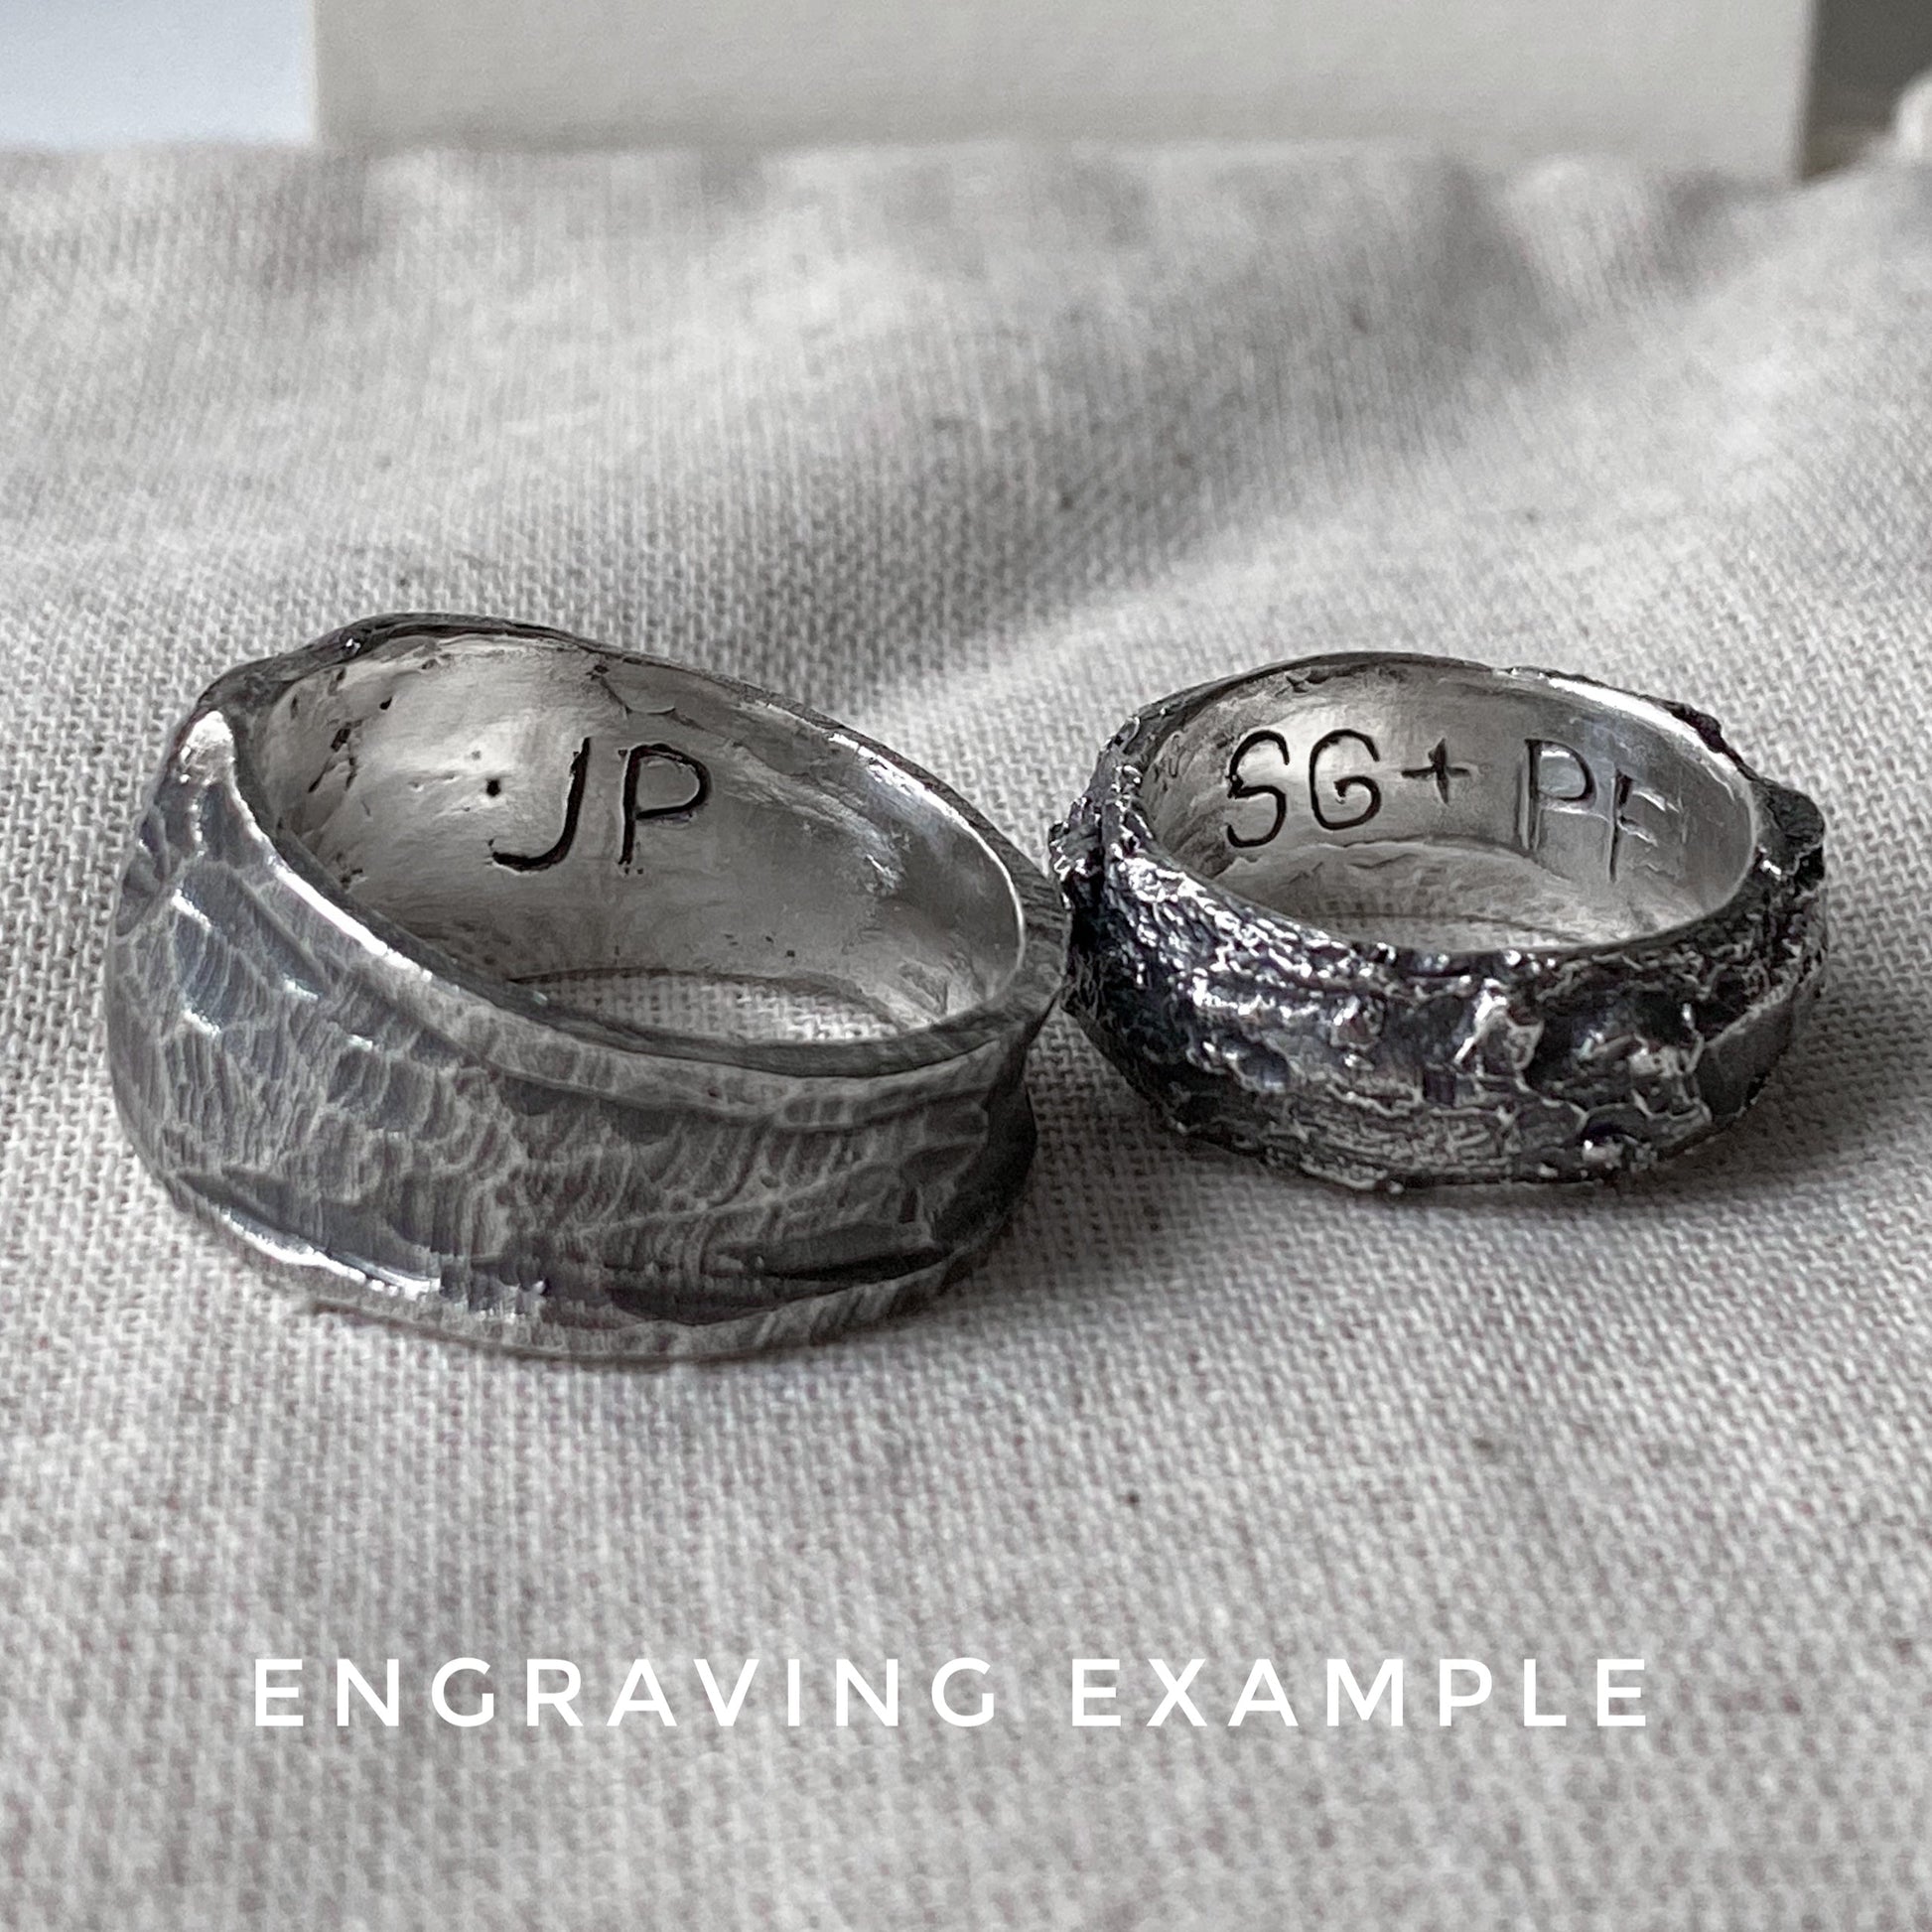 Moon ring - Lightweight asymmetrical ring with soft scratched texture Lightweight rings Project50g 